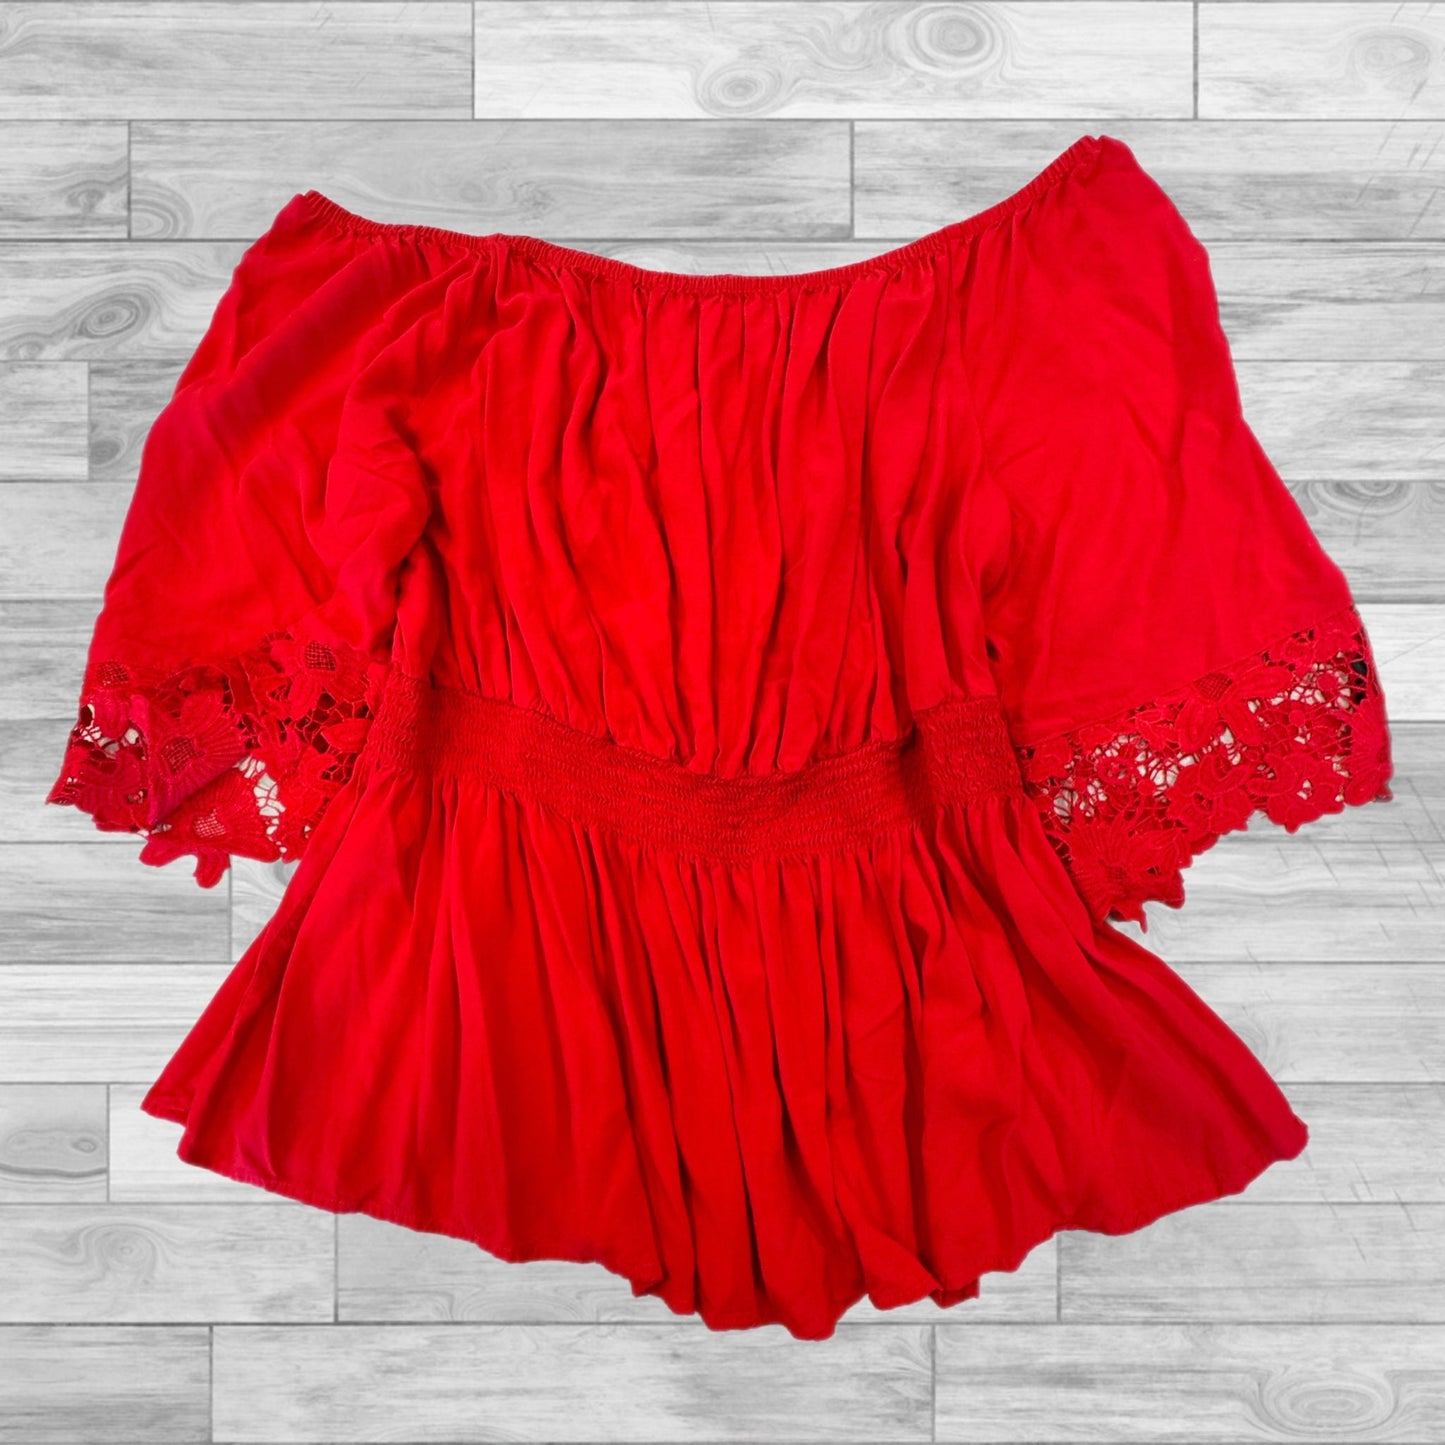 Red Top Short Sleeve Lane Bryant, Size 4x